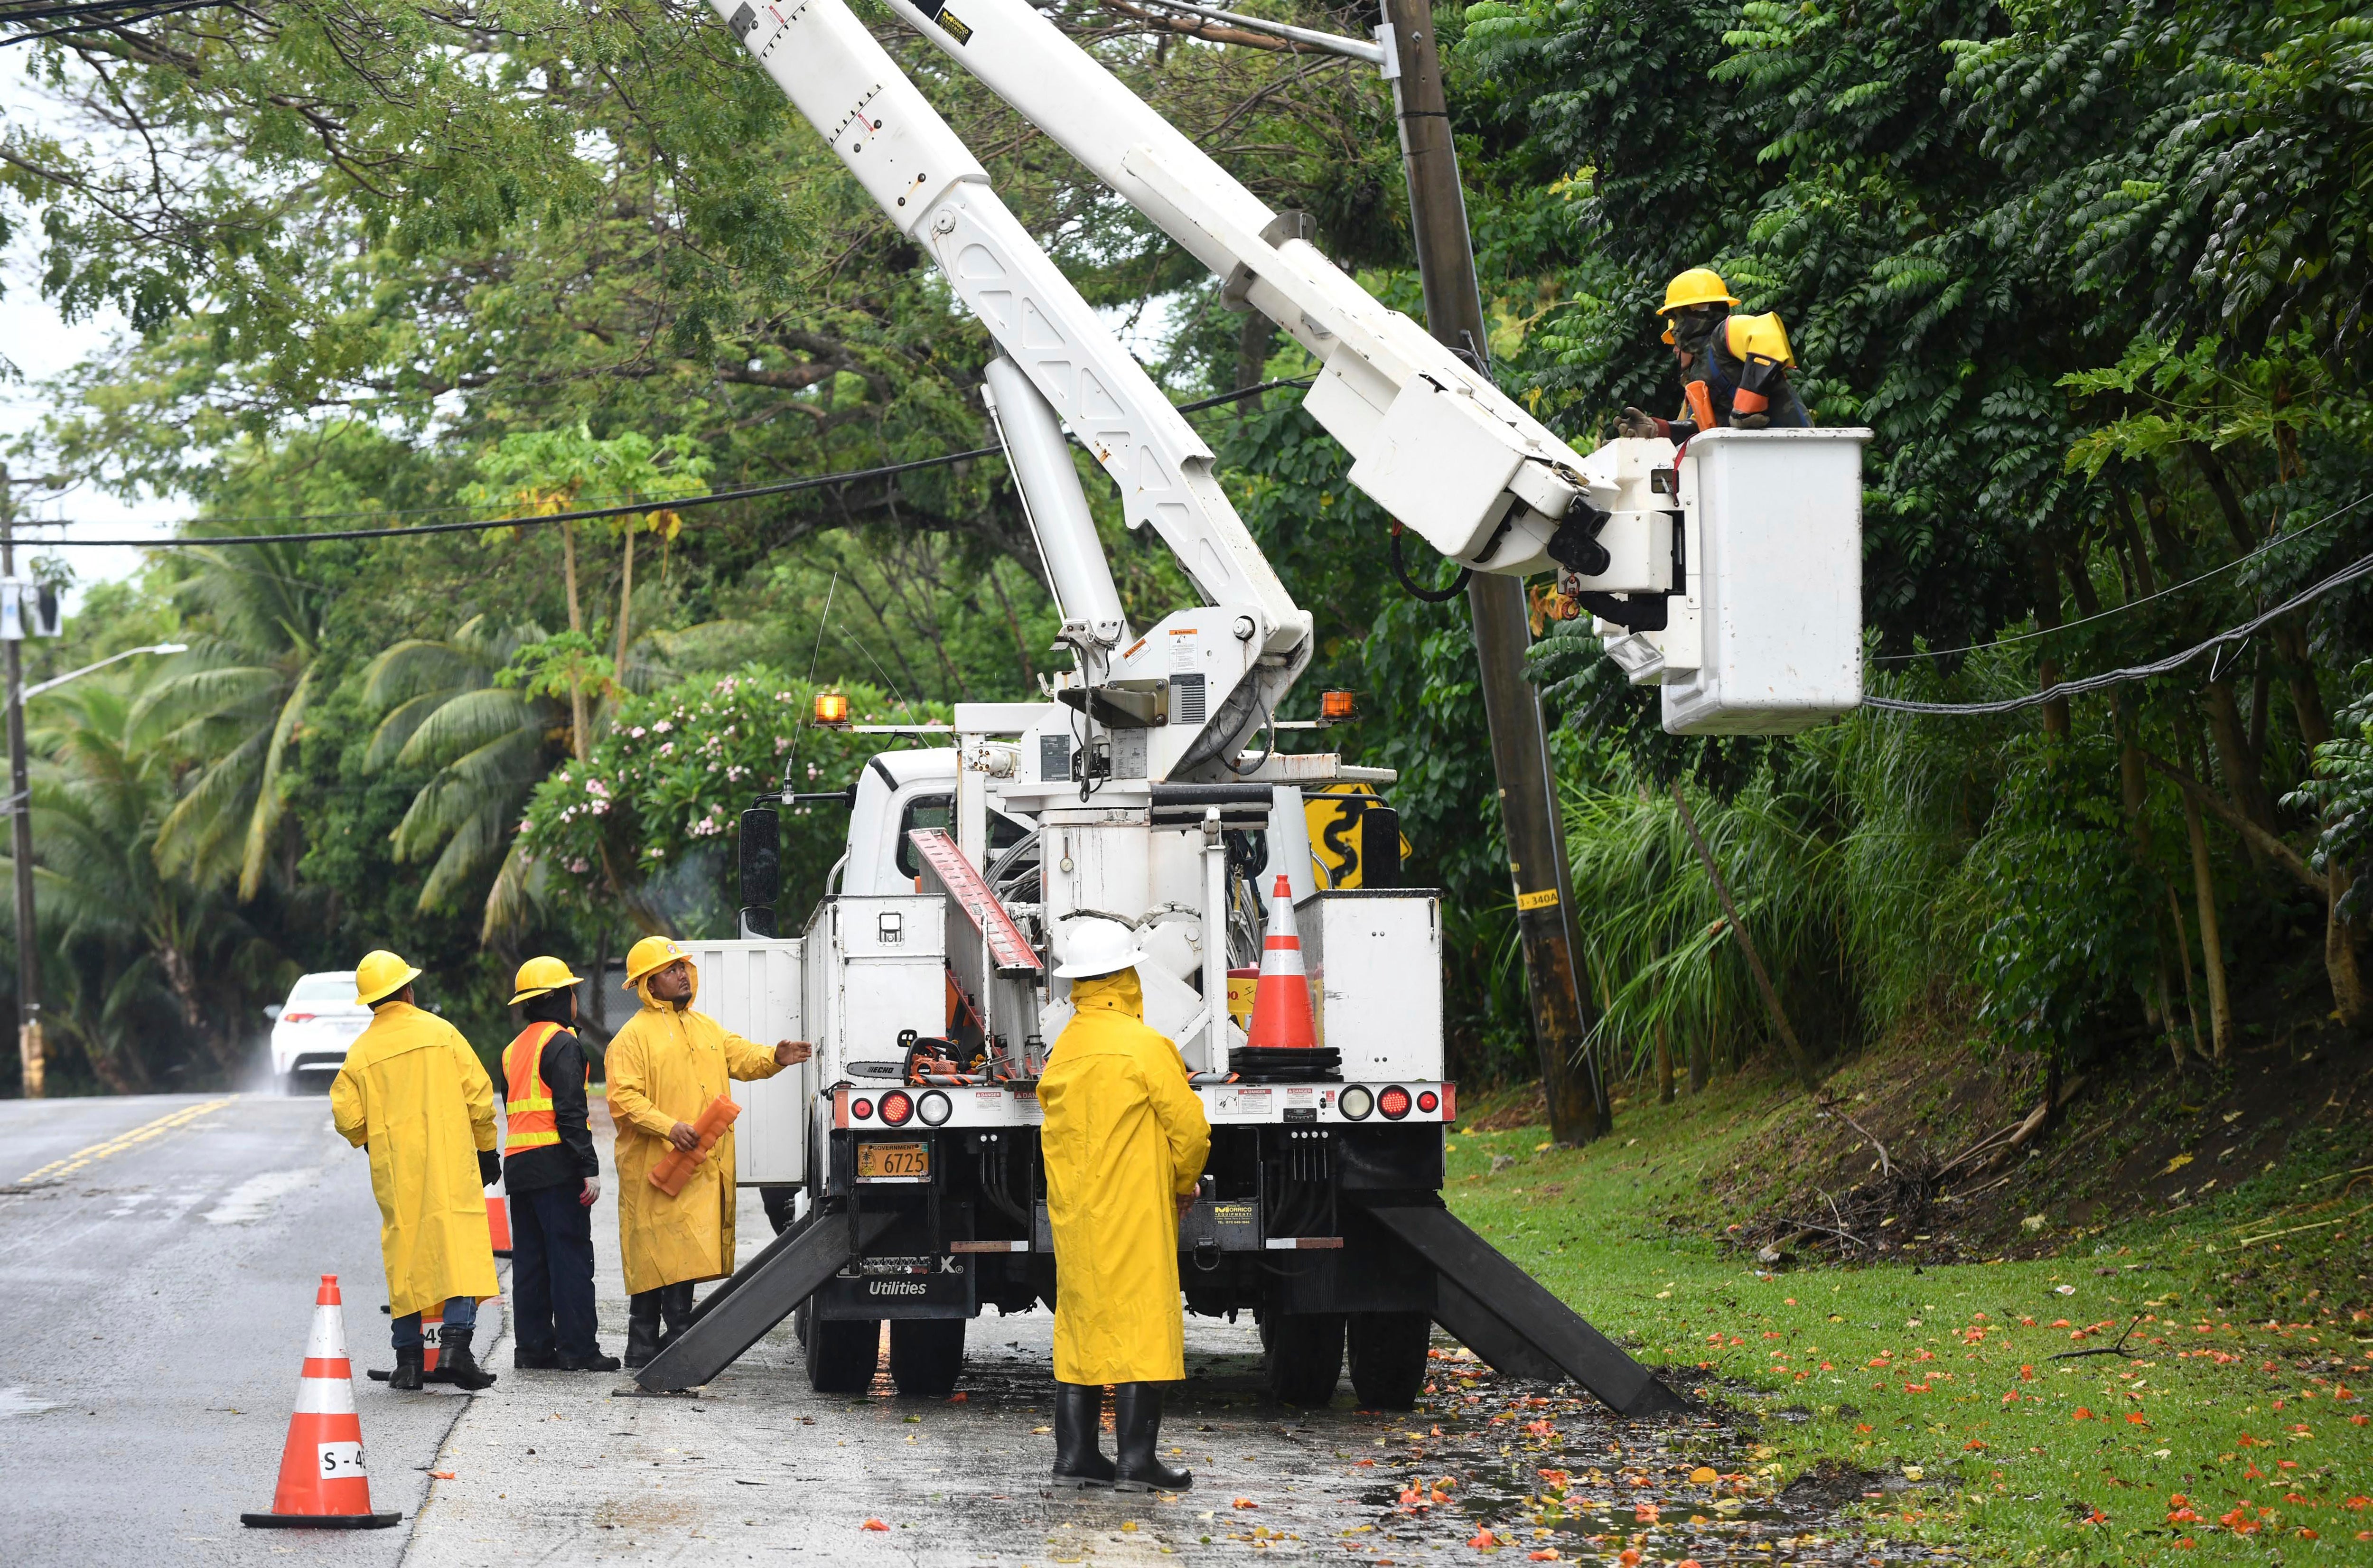 Guam Power Authority personnel conduct tree trimming operations to clear branches away from power lines